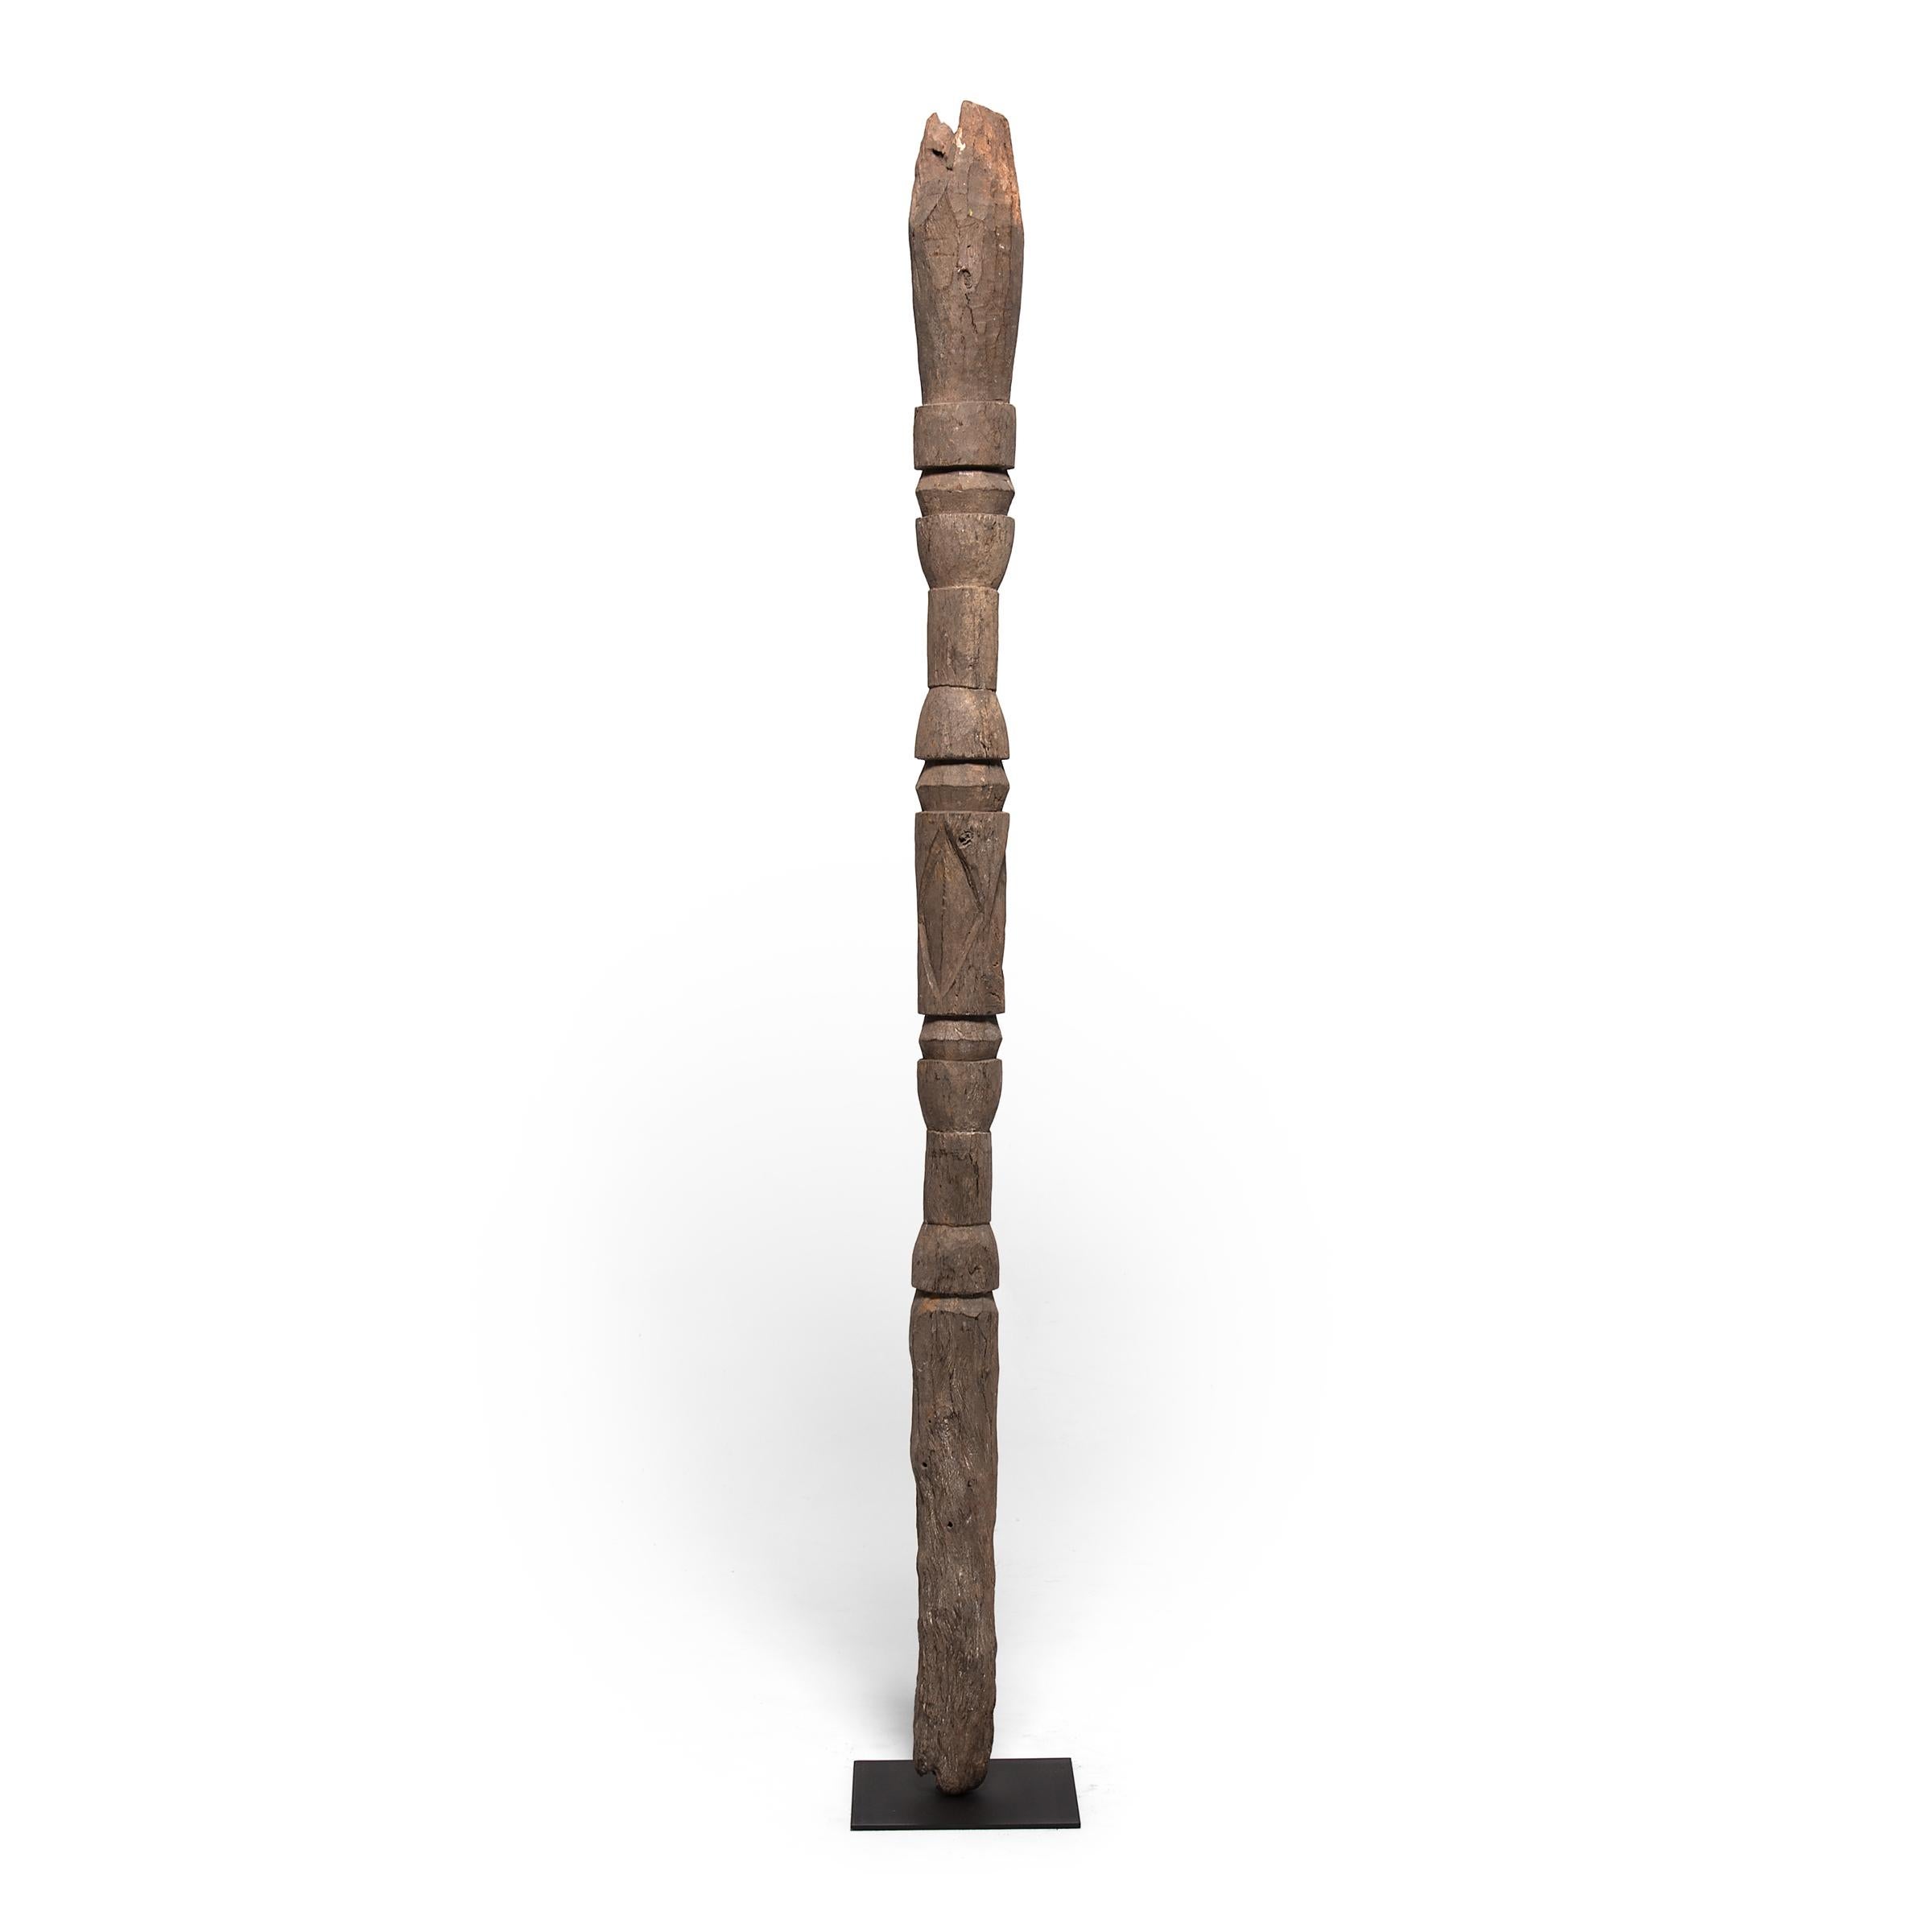 Hand carved with an abstract design, this tall wooden post was crafted by an artisan of the Nupe peoples of Nigeria and once stood as a central support beam for a family home. Nupe posts are typically carved with simple geometric forms, rather than